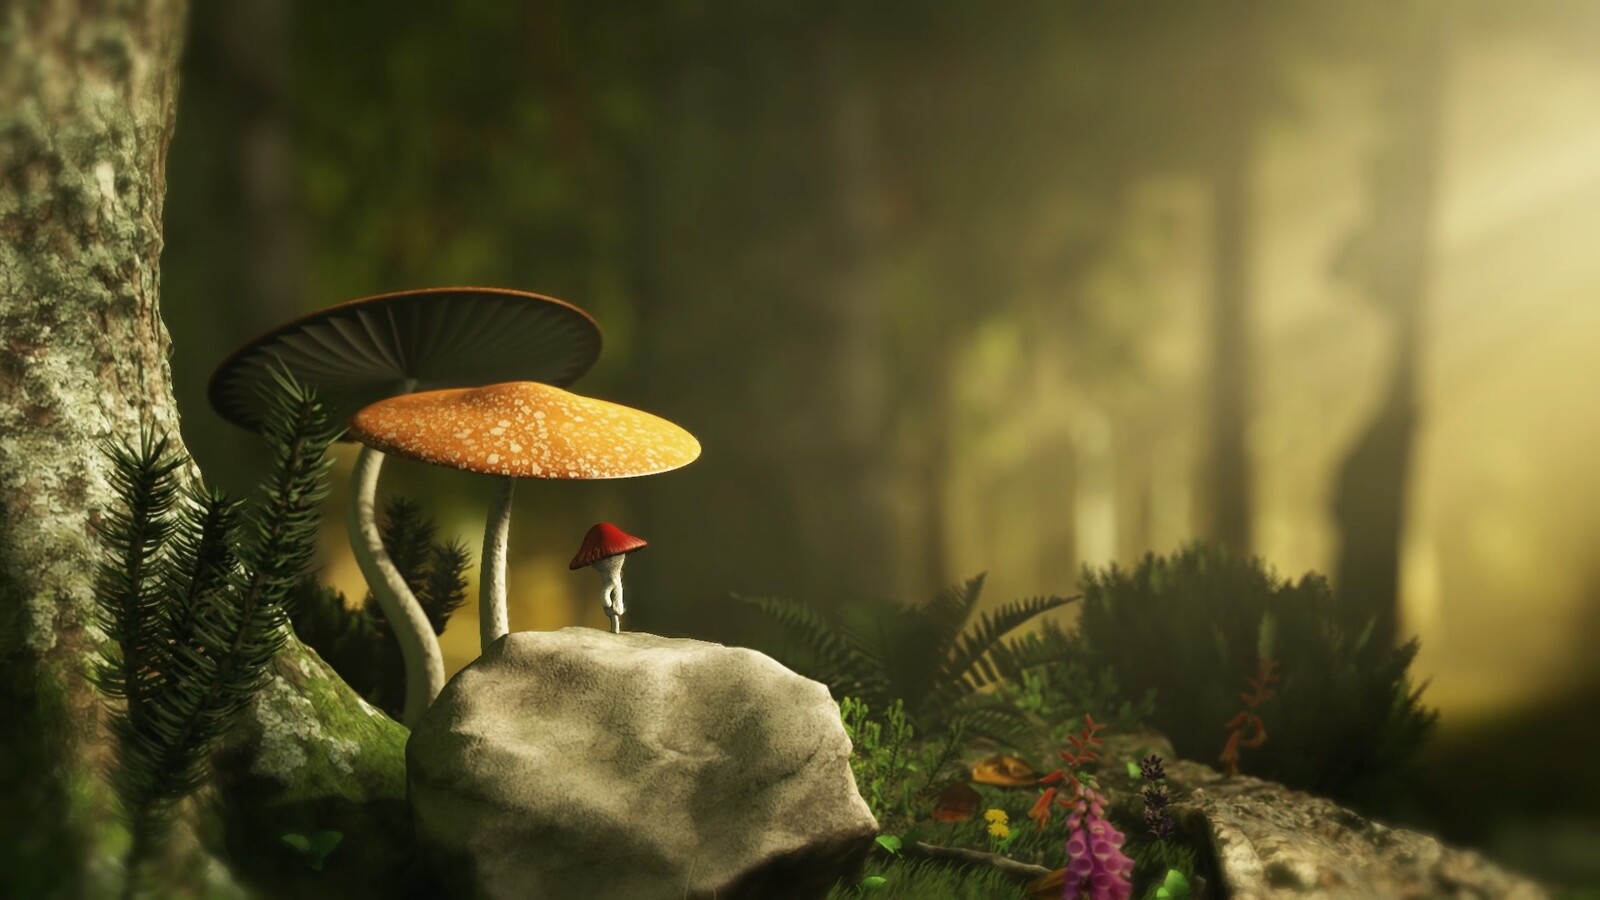 This is my second short released in 2017.

This is the story of a special mushroom who will, during some adventures, meet an old friend again.